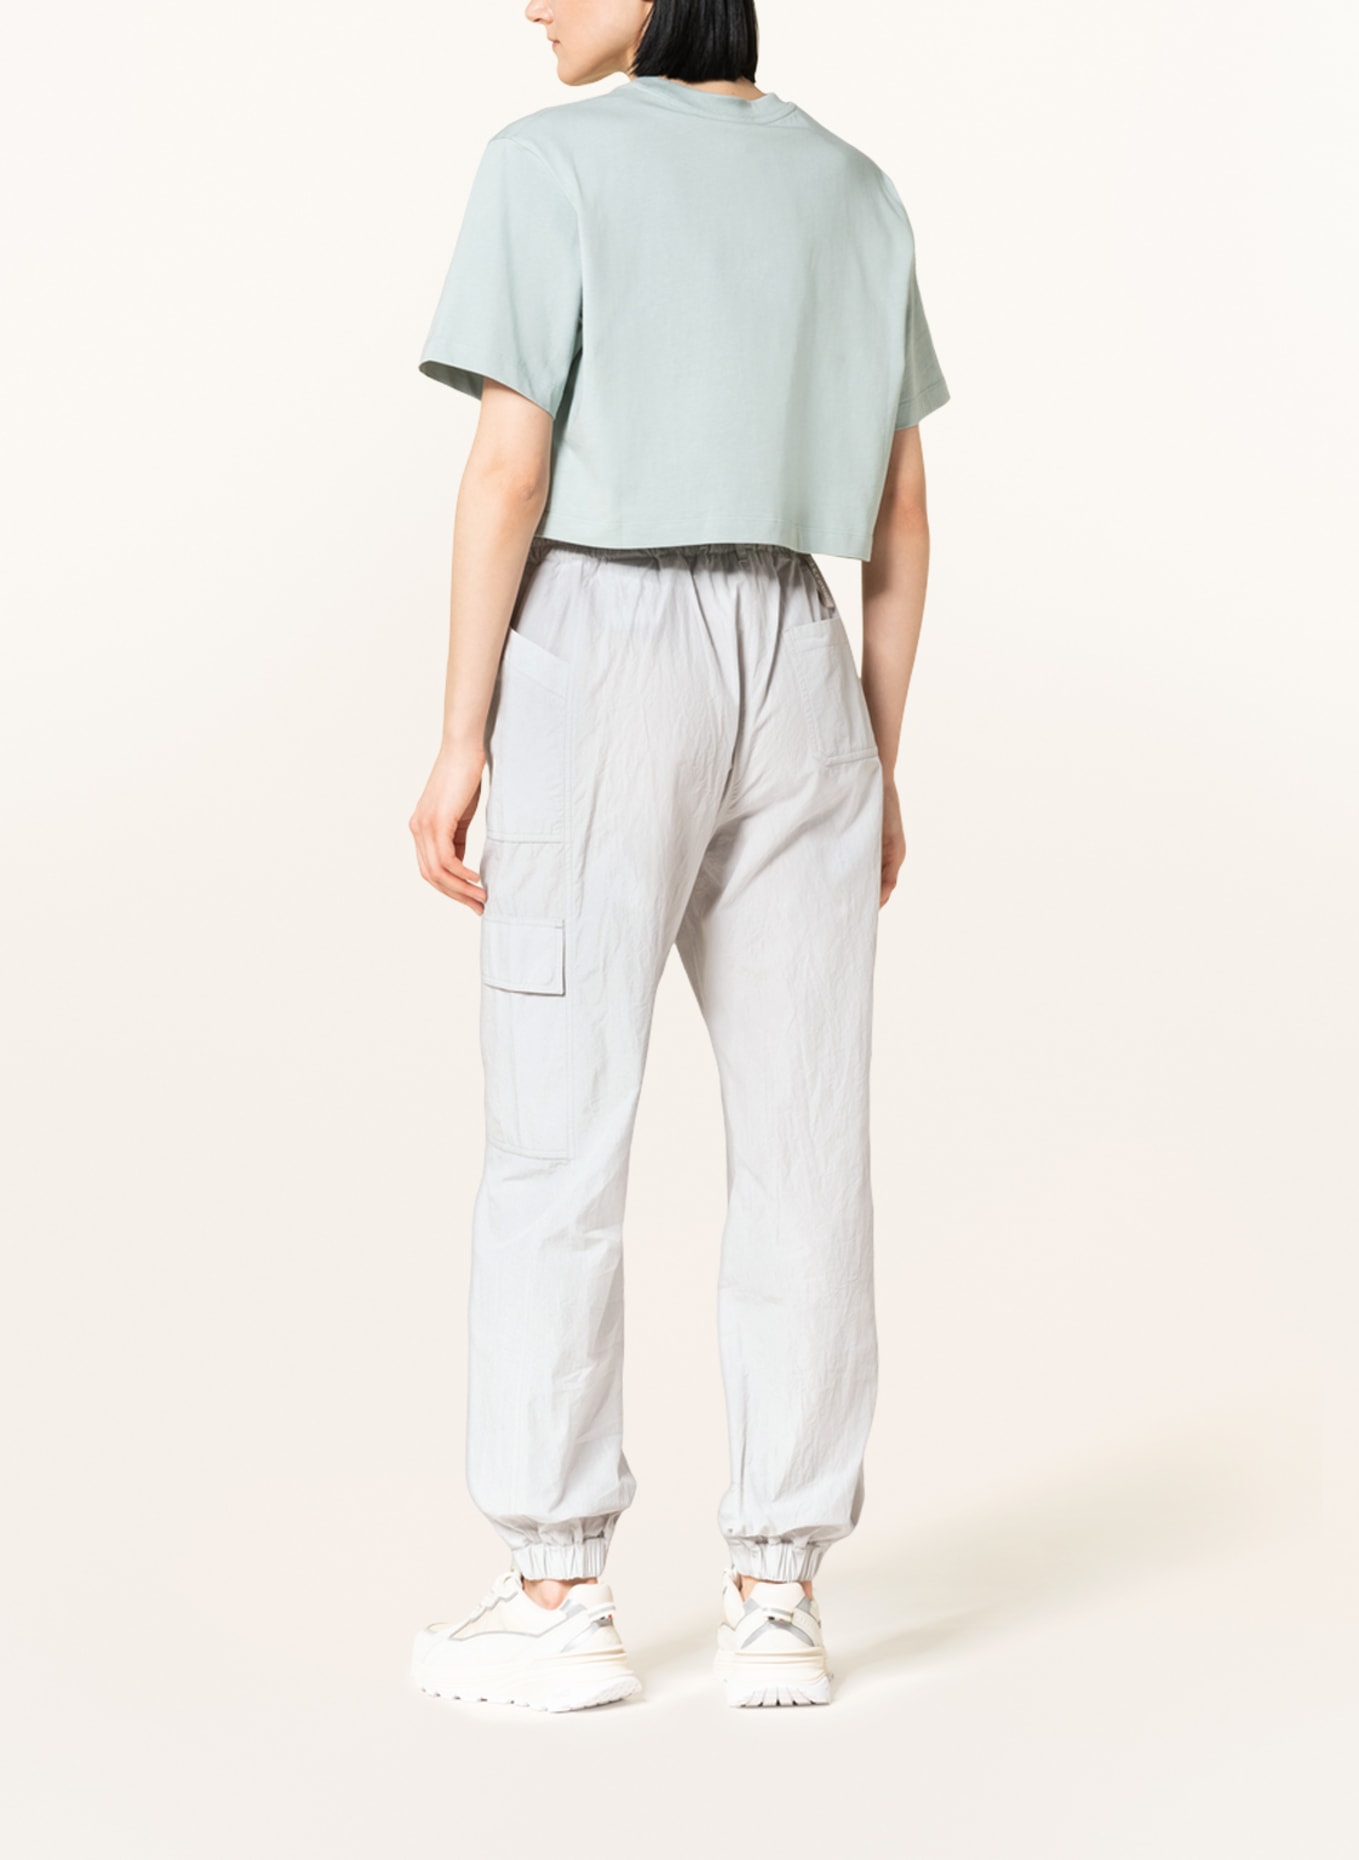 MONCLER Pants in jogger style, Color: LIGHT GRAY (Image 3)